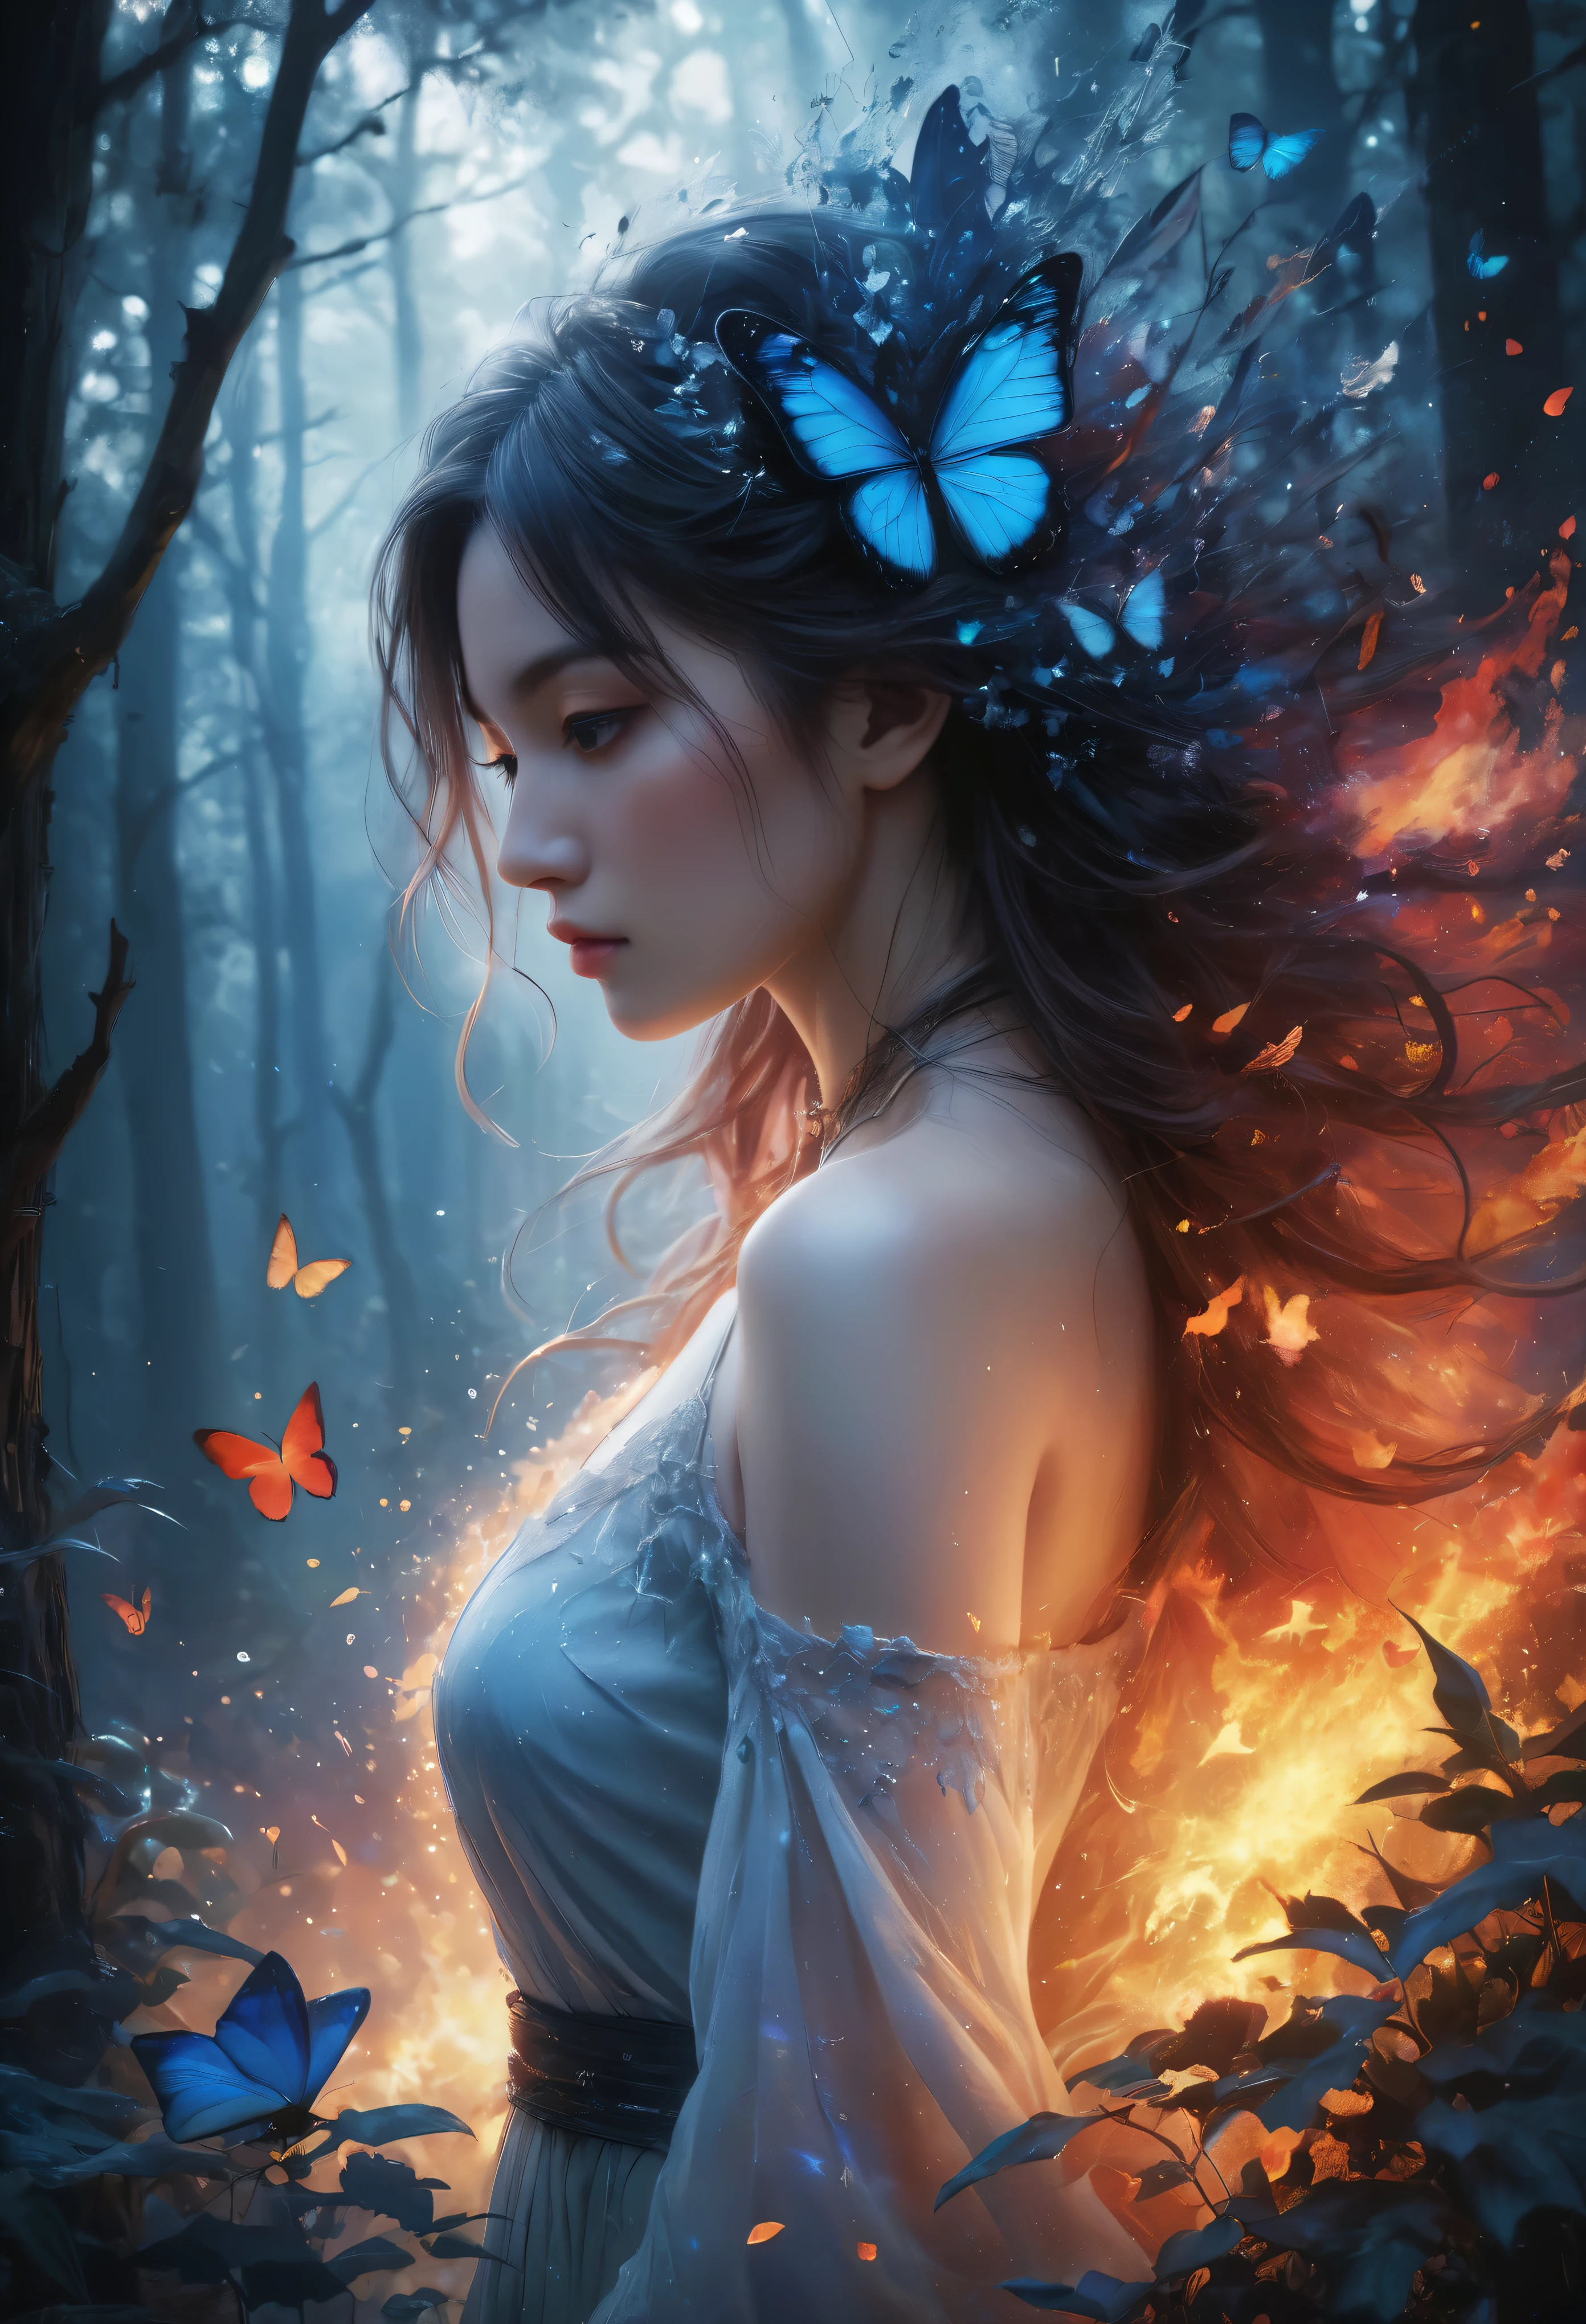 ((Masterpiece in maximum 16K resolution):1.6),((soft_color_photograpy:)1.5), ((Ultra-Detailed):1.4),((Movie-like still images and dynamic angles):1.3) | (double contact:1.3), Beautiful blue butterfly silhouette effect, Superimposed on Very Pretty Female《dark forest sky》Agnes Cecile, Jeremy Mann, Oil and ink on canvas, fine art, super dramatic light, photoillustration, amazing depth, the ultra-detailed, iridescent red, superfluous dreams, intricately details, amazing depth, Amazing atmosphere, Mesmerizing whimsical vibrant landscapes, Maximalism (beautiful outside, Ugly inside, pressure and pain, beauty and despair, hard and soft, positive and negative, hot and cold, Sweet and sour, Vibrant but boring, Perfect harmony, light and shadows, hot and cold, old and young, Fire and ice, Yin and yang, australian, Black and white, hot and cold, organic and mechanical, Corresponding color, loud and quiet, Chaos and peace, day and night:1.2) The complex masterpiece of a real-time engineering leader. | Rendered in ultra-high definition with UHD and retina quality, this masterpiece ensures anatomical correctness and textured skin with super detail. With a focus on high quality and accuracy, this award-winning portrayal captures every nuance in stunning 16k resolution, immersing viewers in its lifelike depiction. | ((perfect_composition, perfect_design, perfect_layout, perfect_detail, ultra_detailed)), ((enhance_all, fix_everything)), More Detail, Enhance.